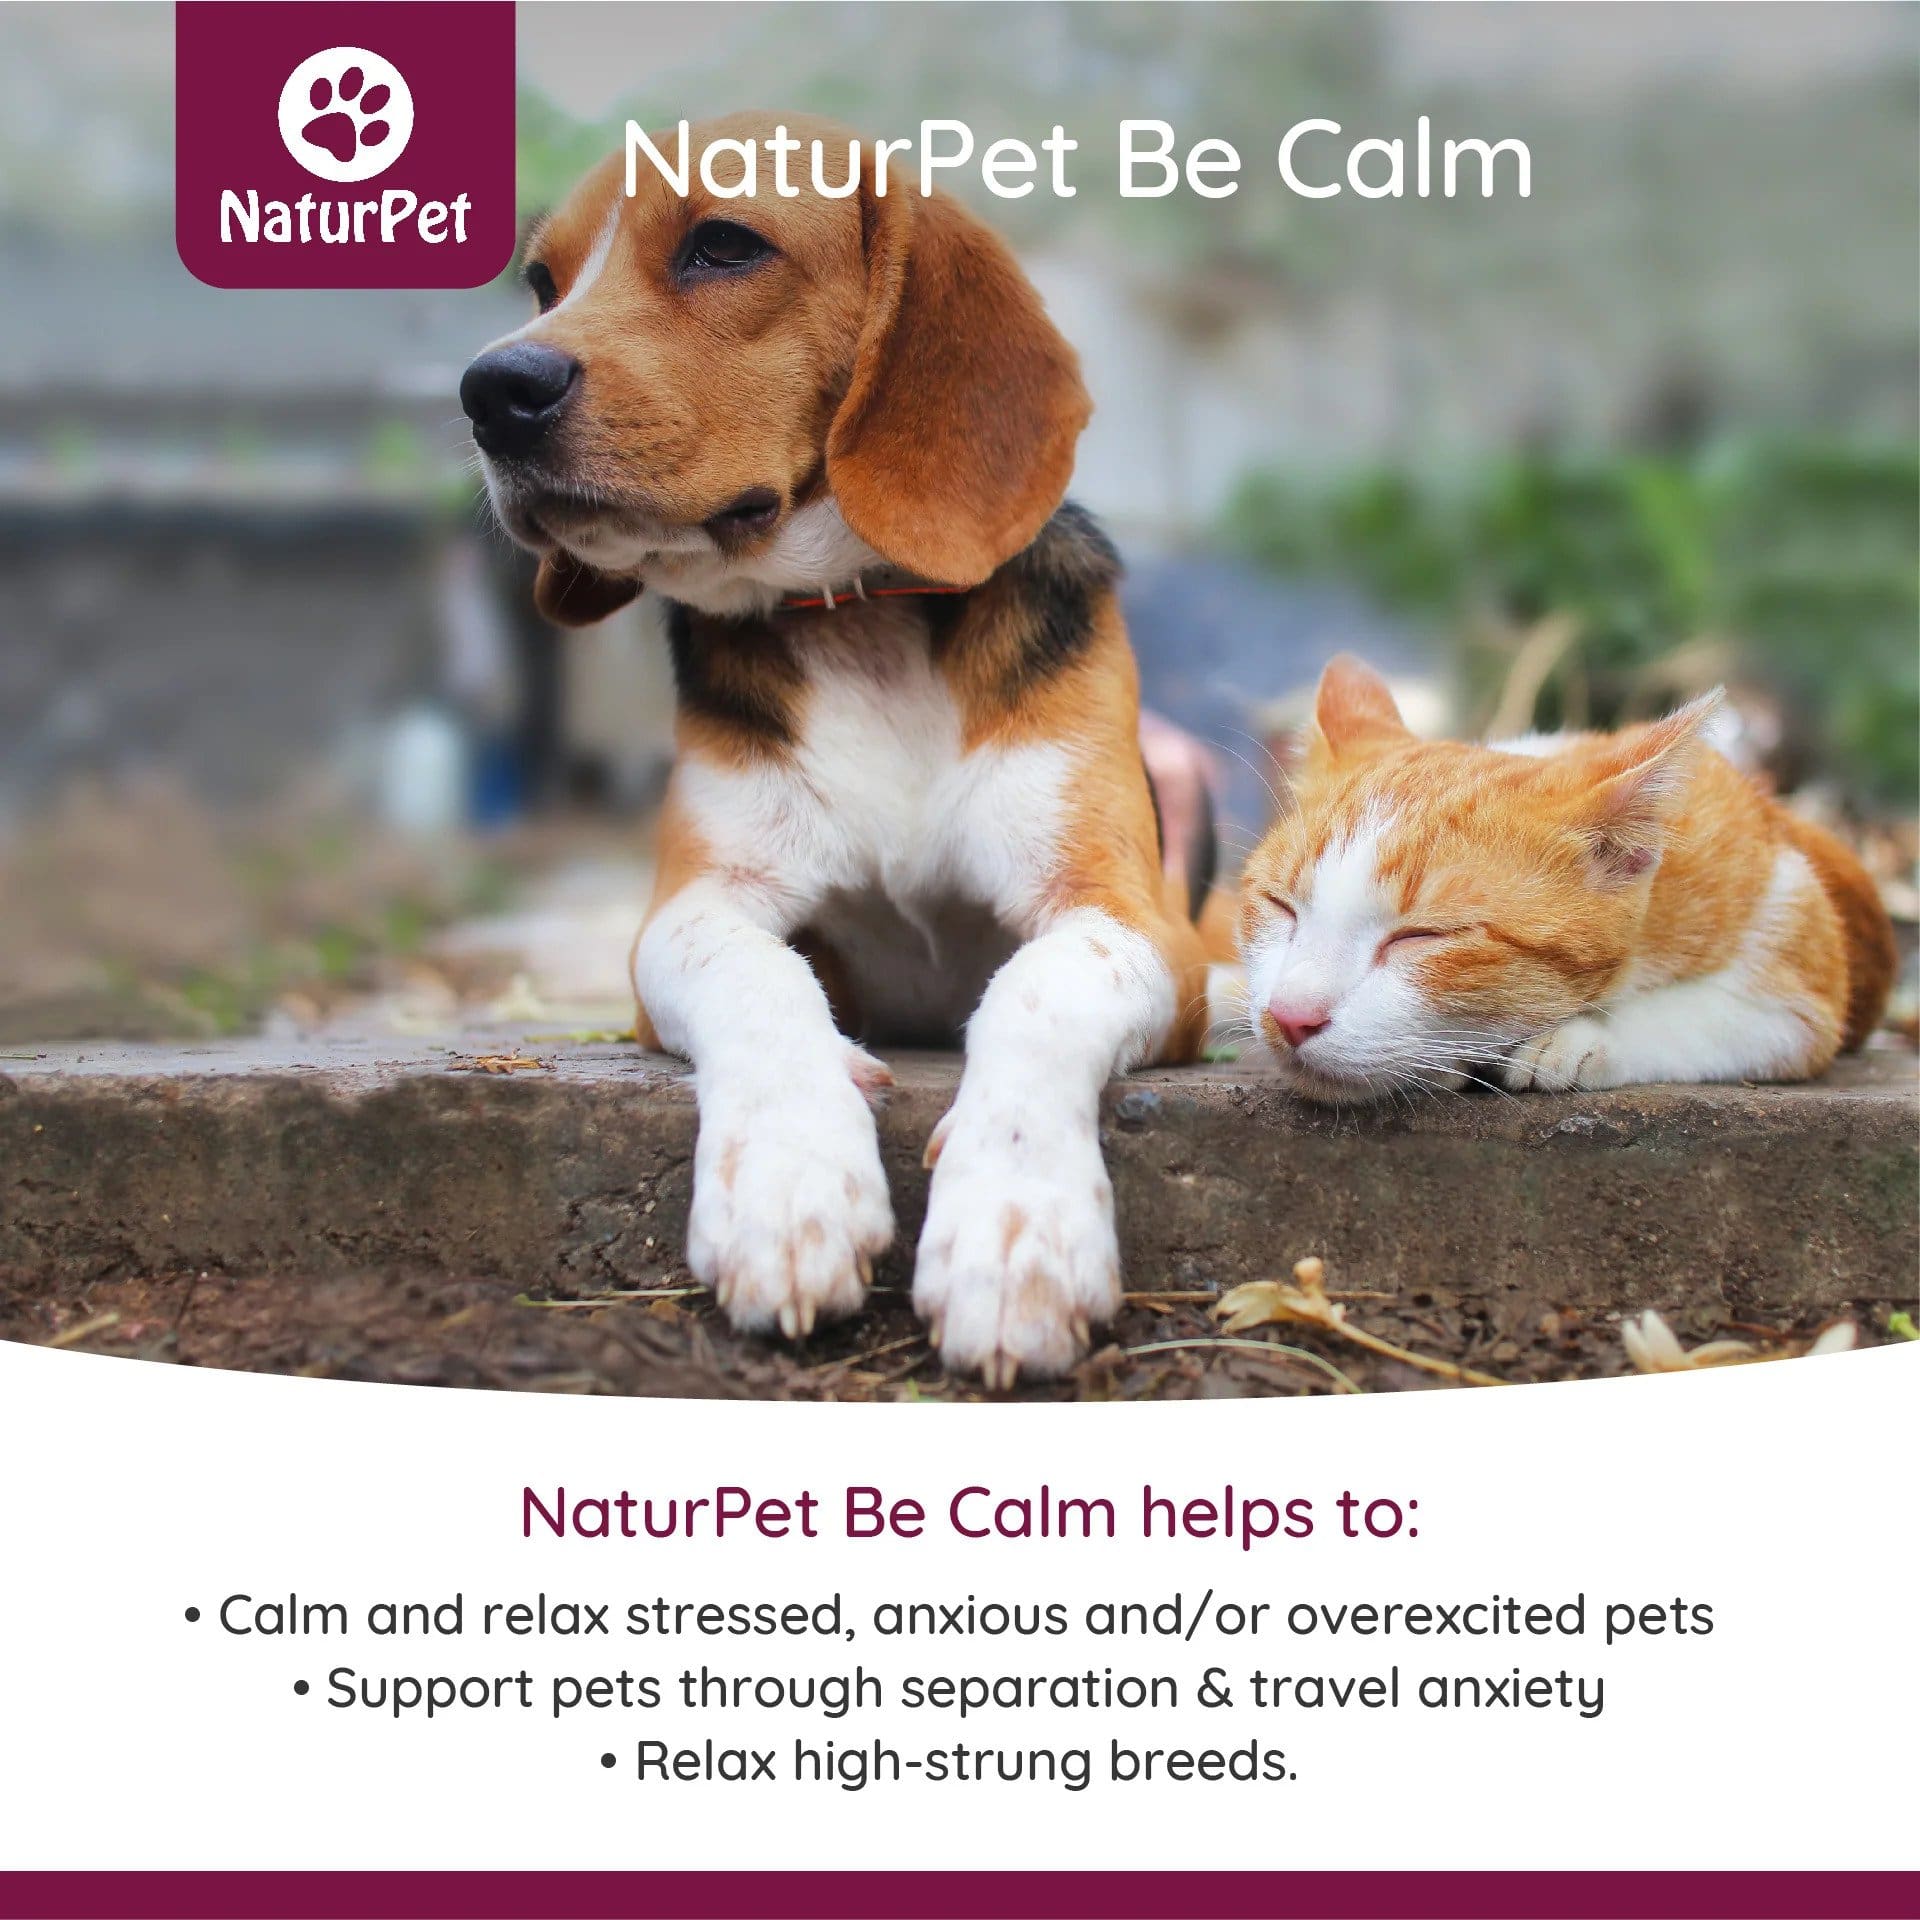 NaturPet Be Calm - Soothe Your Stressed Pet Benefits